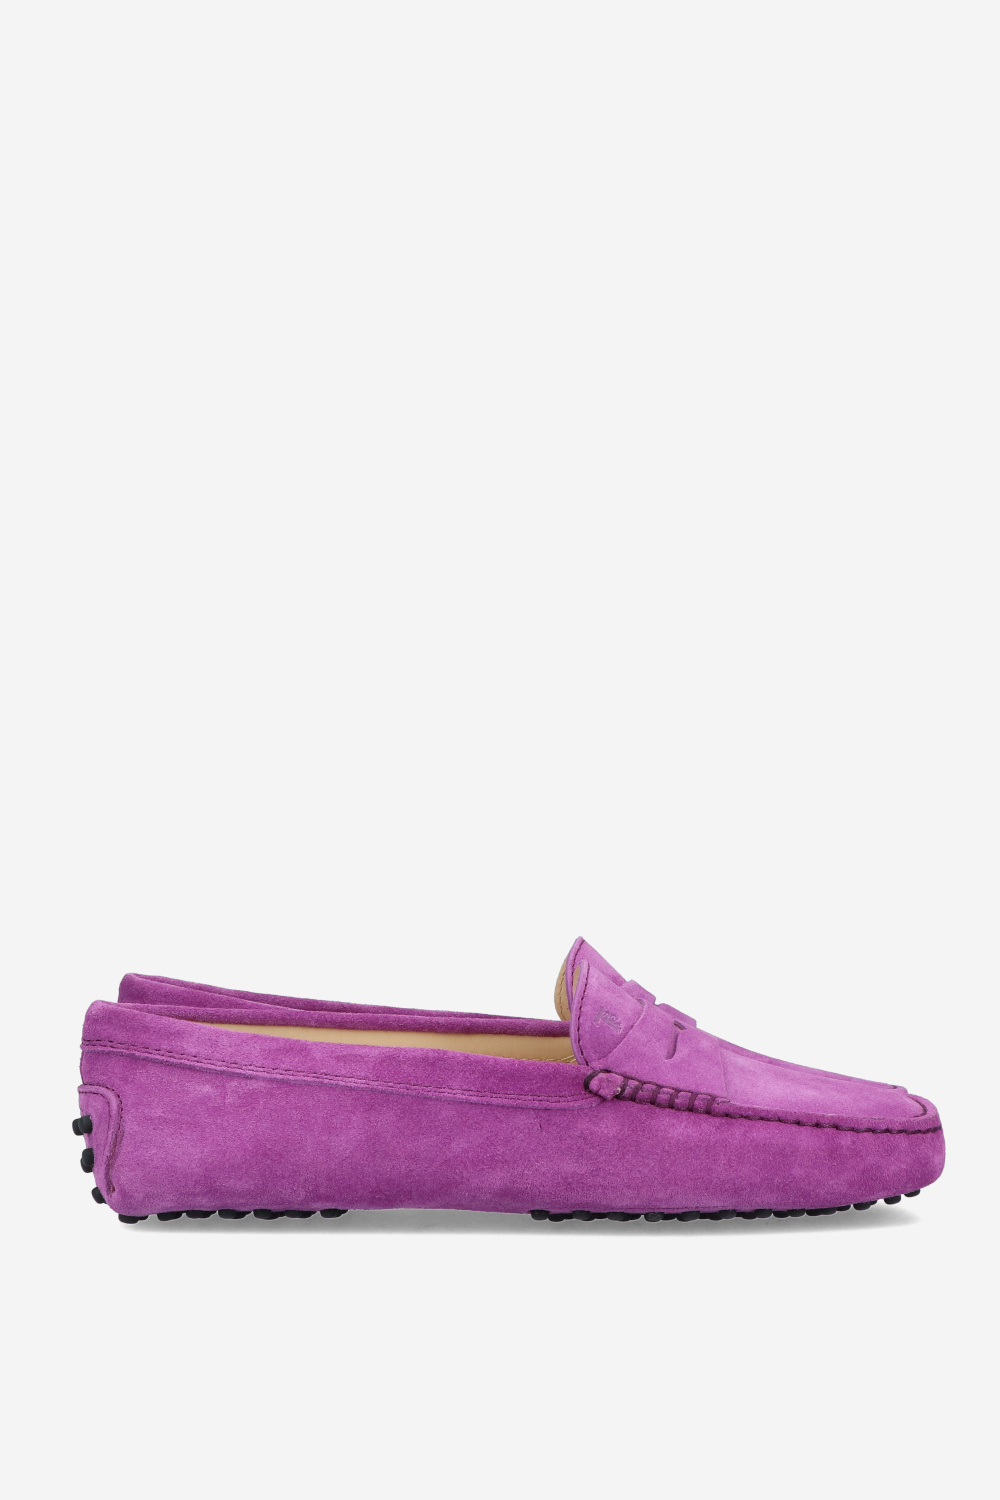 Tods Loafers Purple